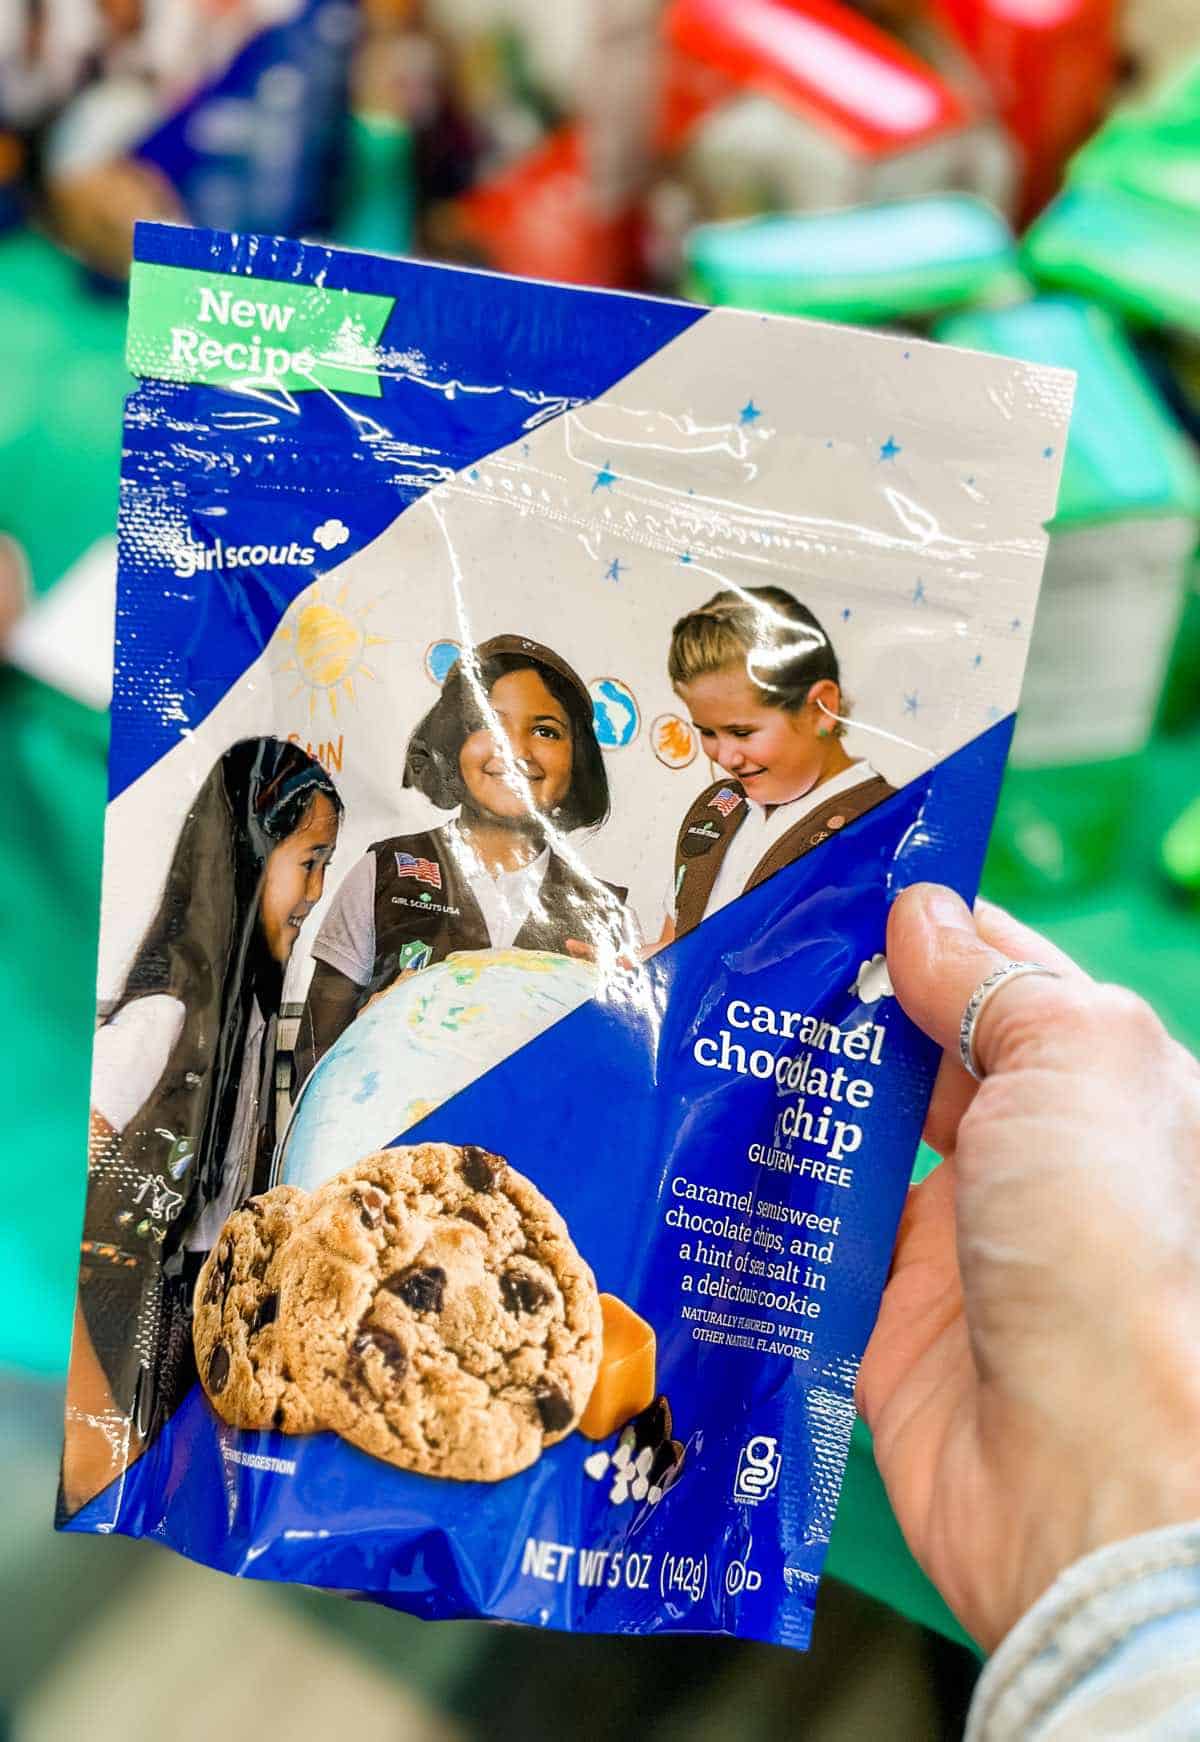 Blue bag of Caramel Chocolate Chip cookies from Girl Scouts with vegan label. 